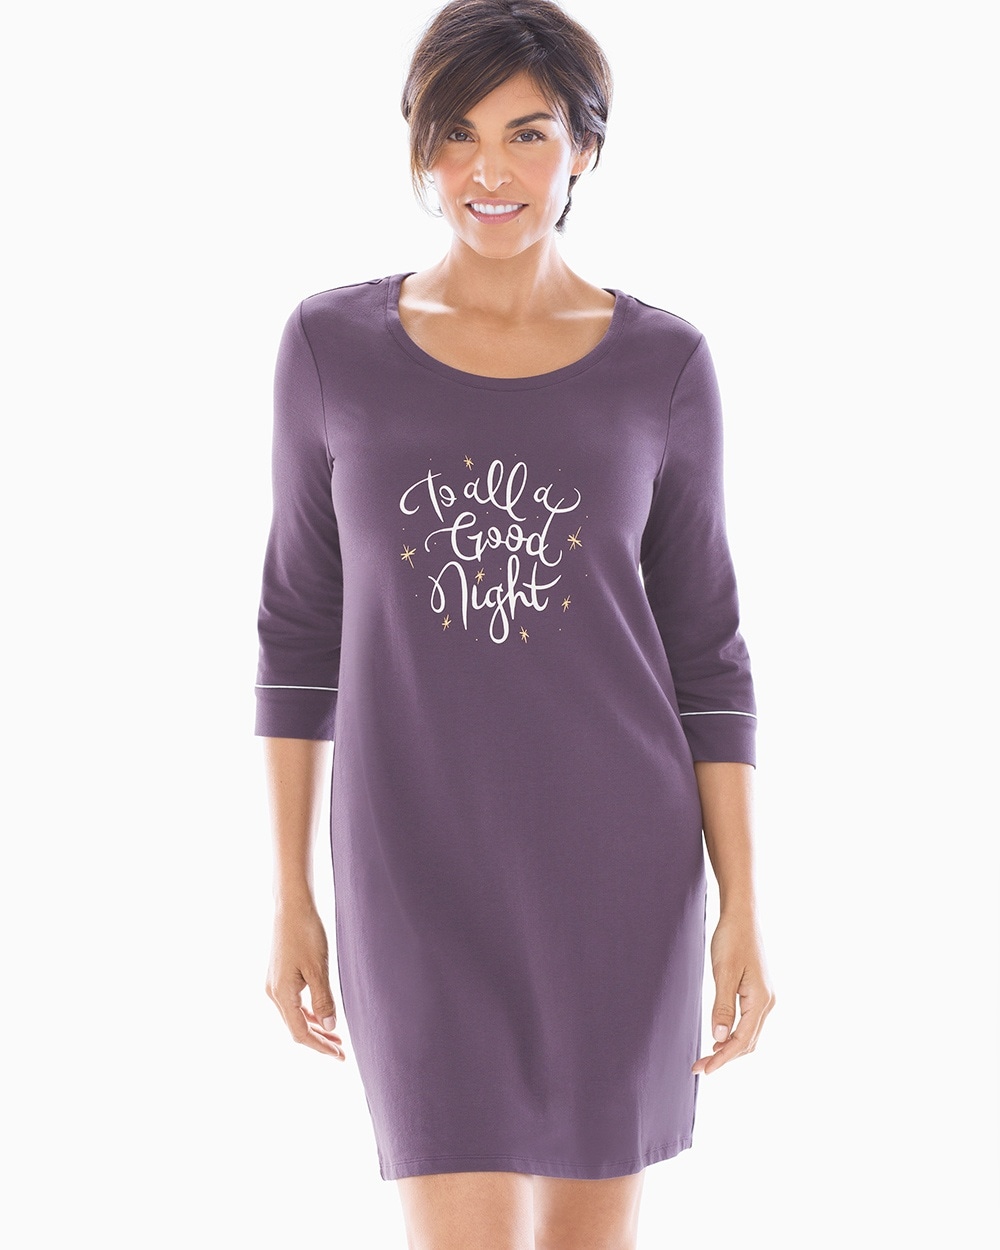 Embraceable Sleepshirt Black Violet with Graphic